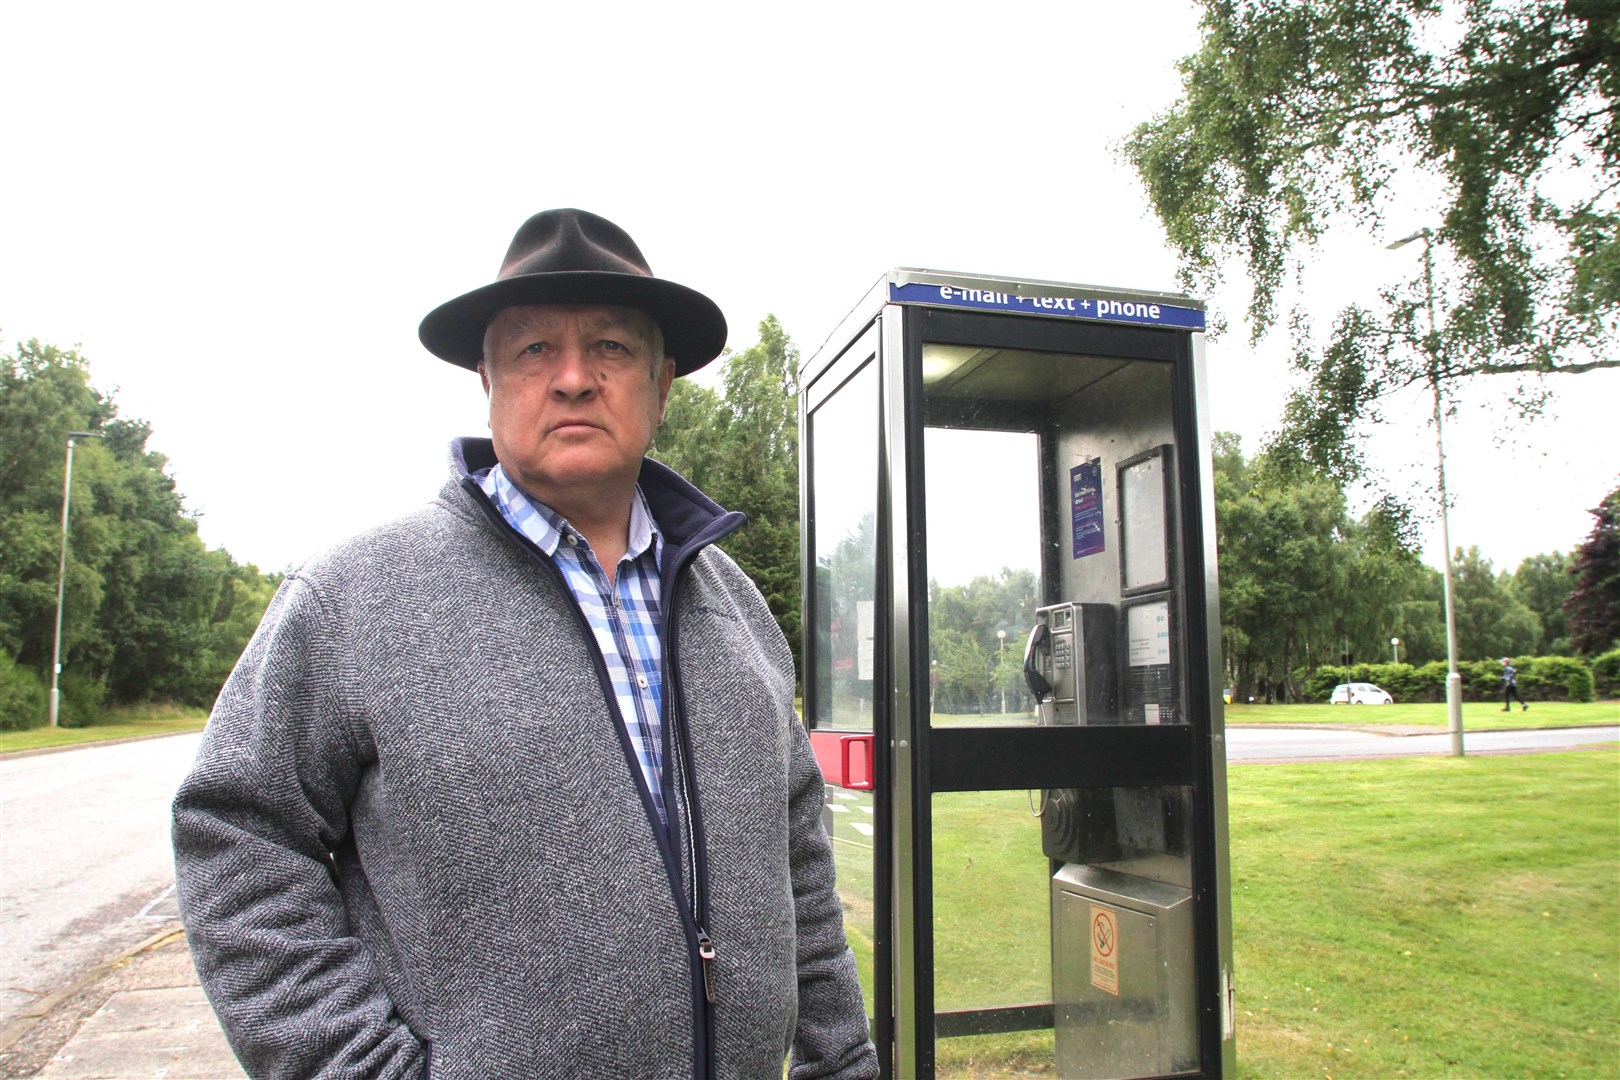 Councillor Bill Lobban at the public payphone on Dalfaber Drive in Aviemore which was under threat in recent consultation.